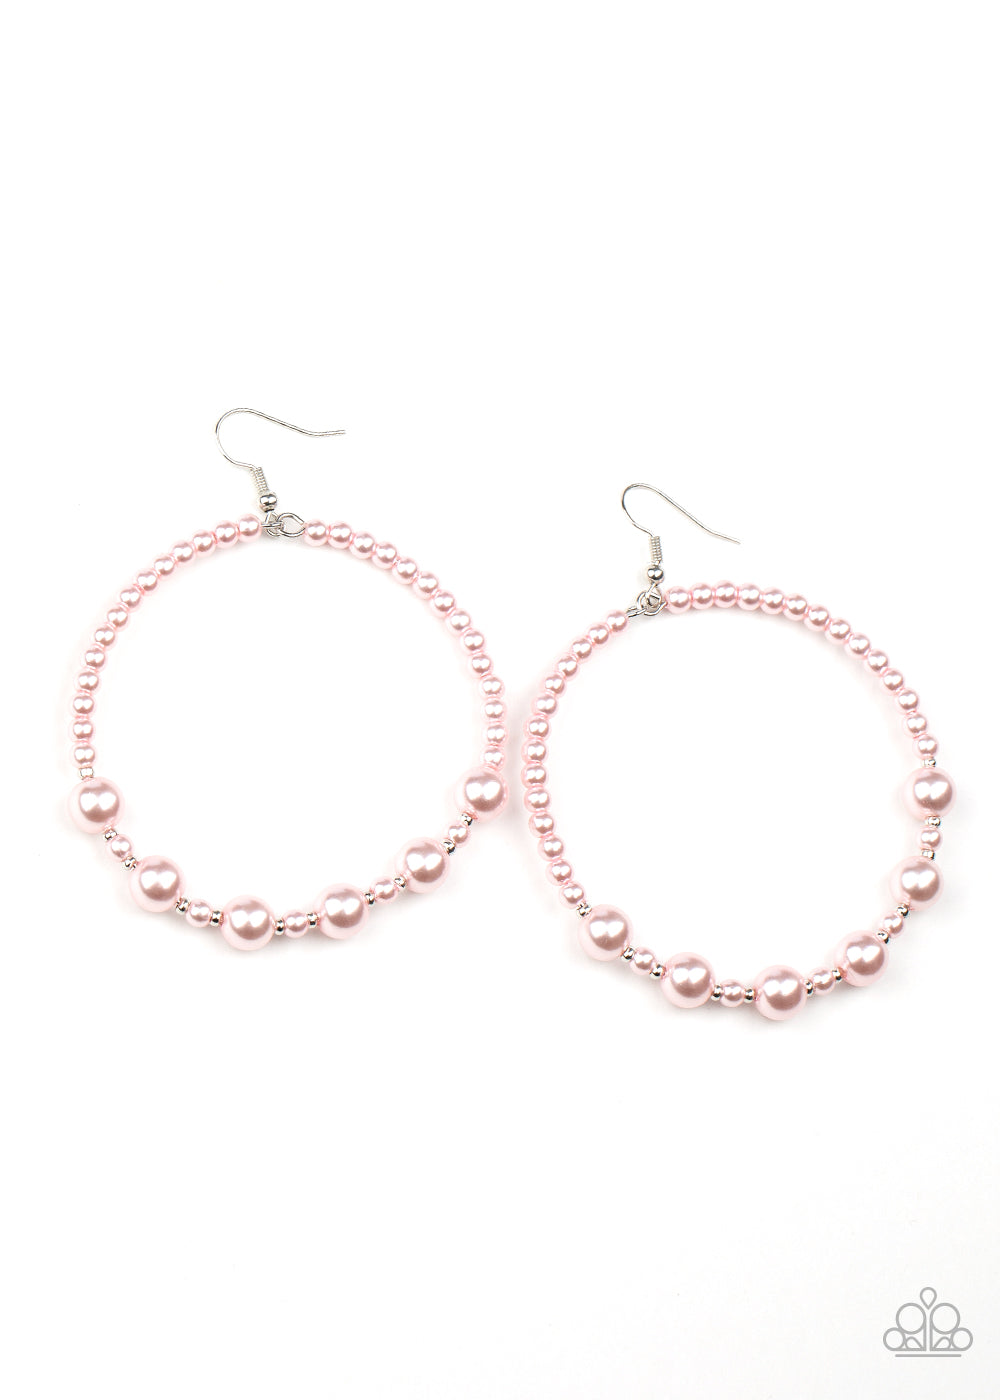 Paparazzi Accessories Boss Posh - Pink Pearl Earrings - Lady T Accessories